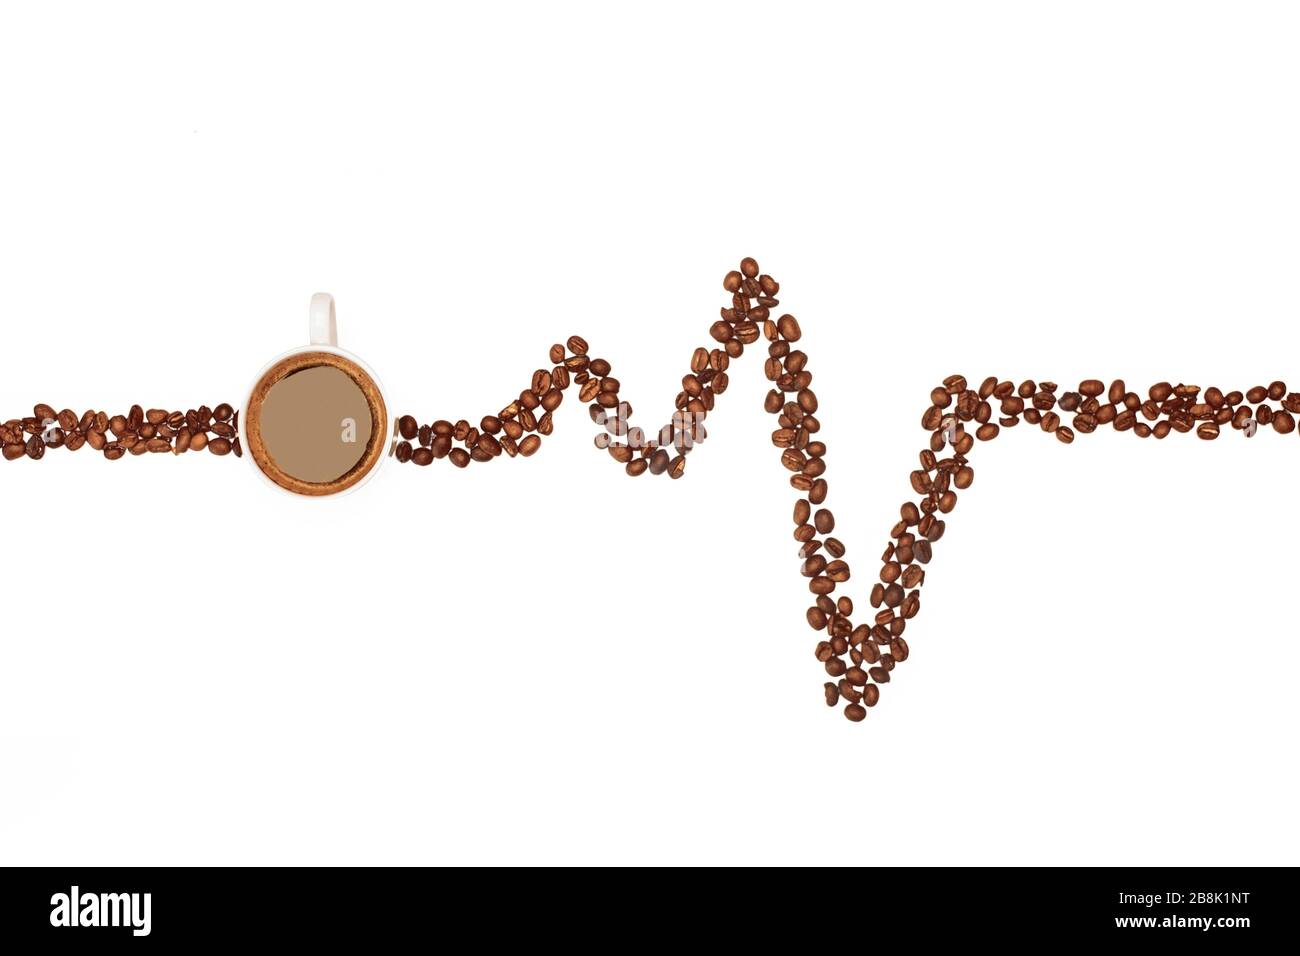 Creative still lifes of liquid and coffee beans drawing an electrocardiogram Stock Photo